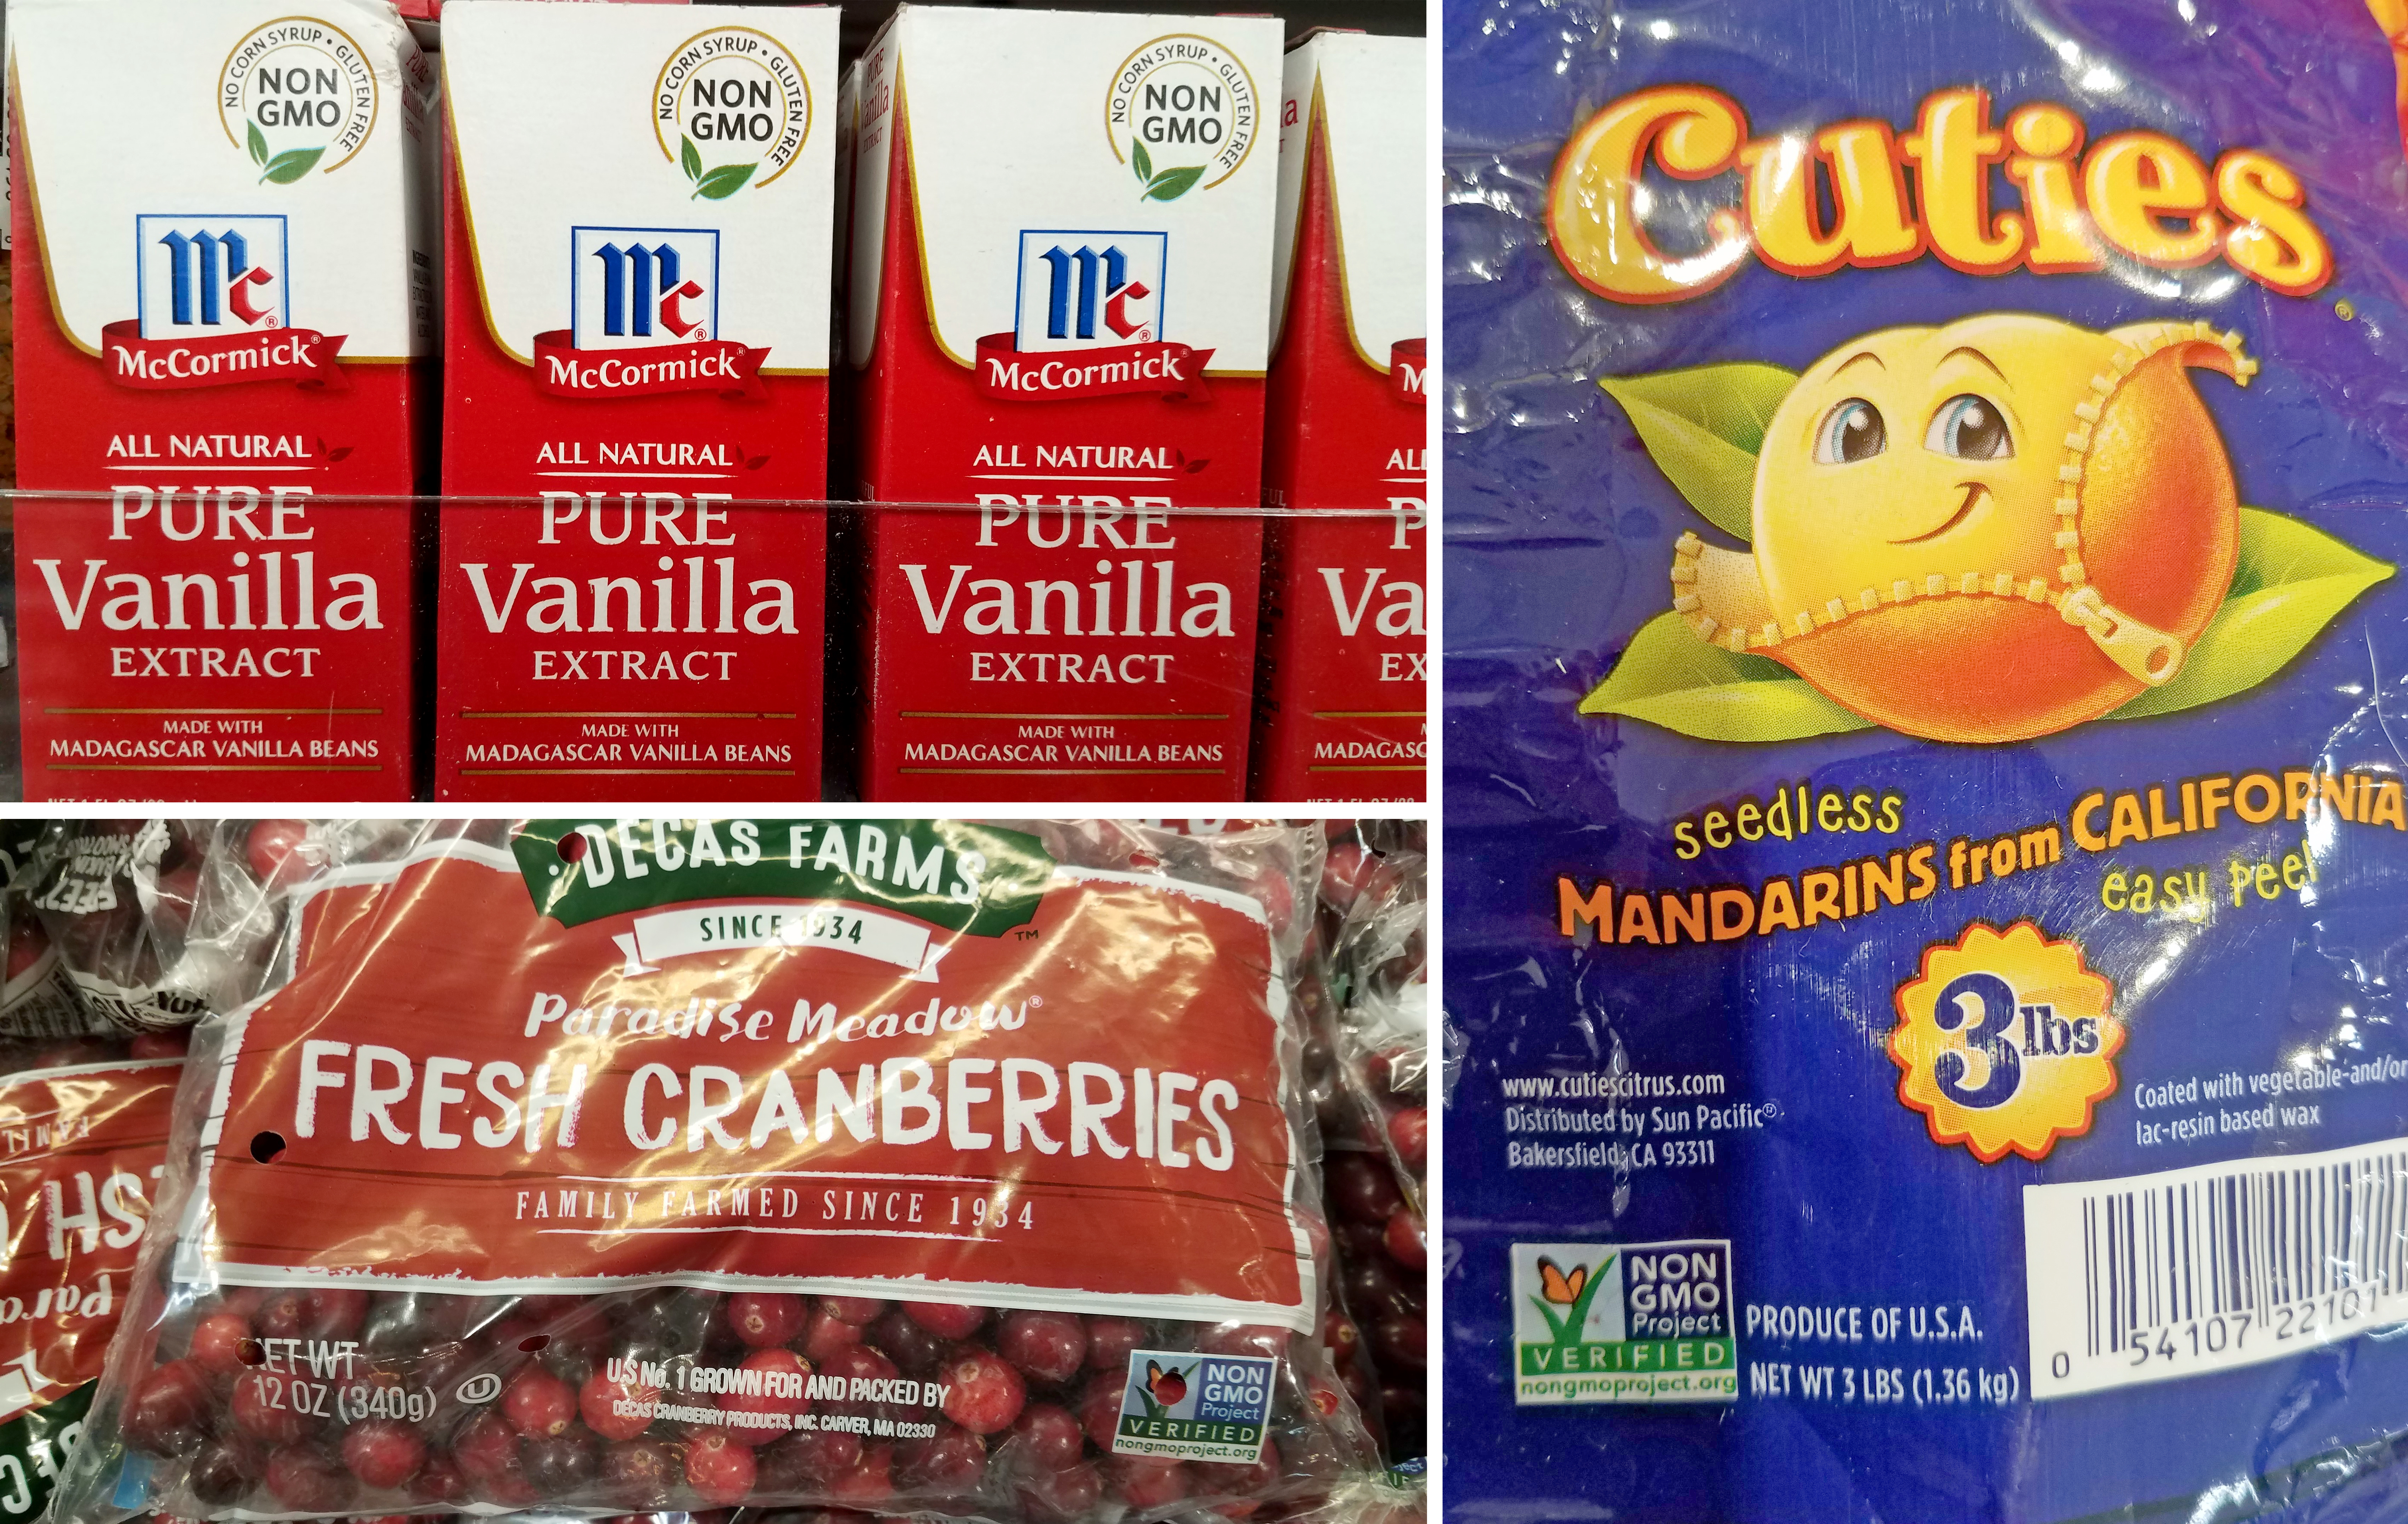 Common food items containing the Non-GMO Project label that currently have no GMO members